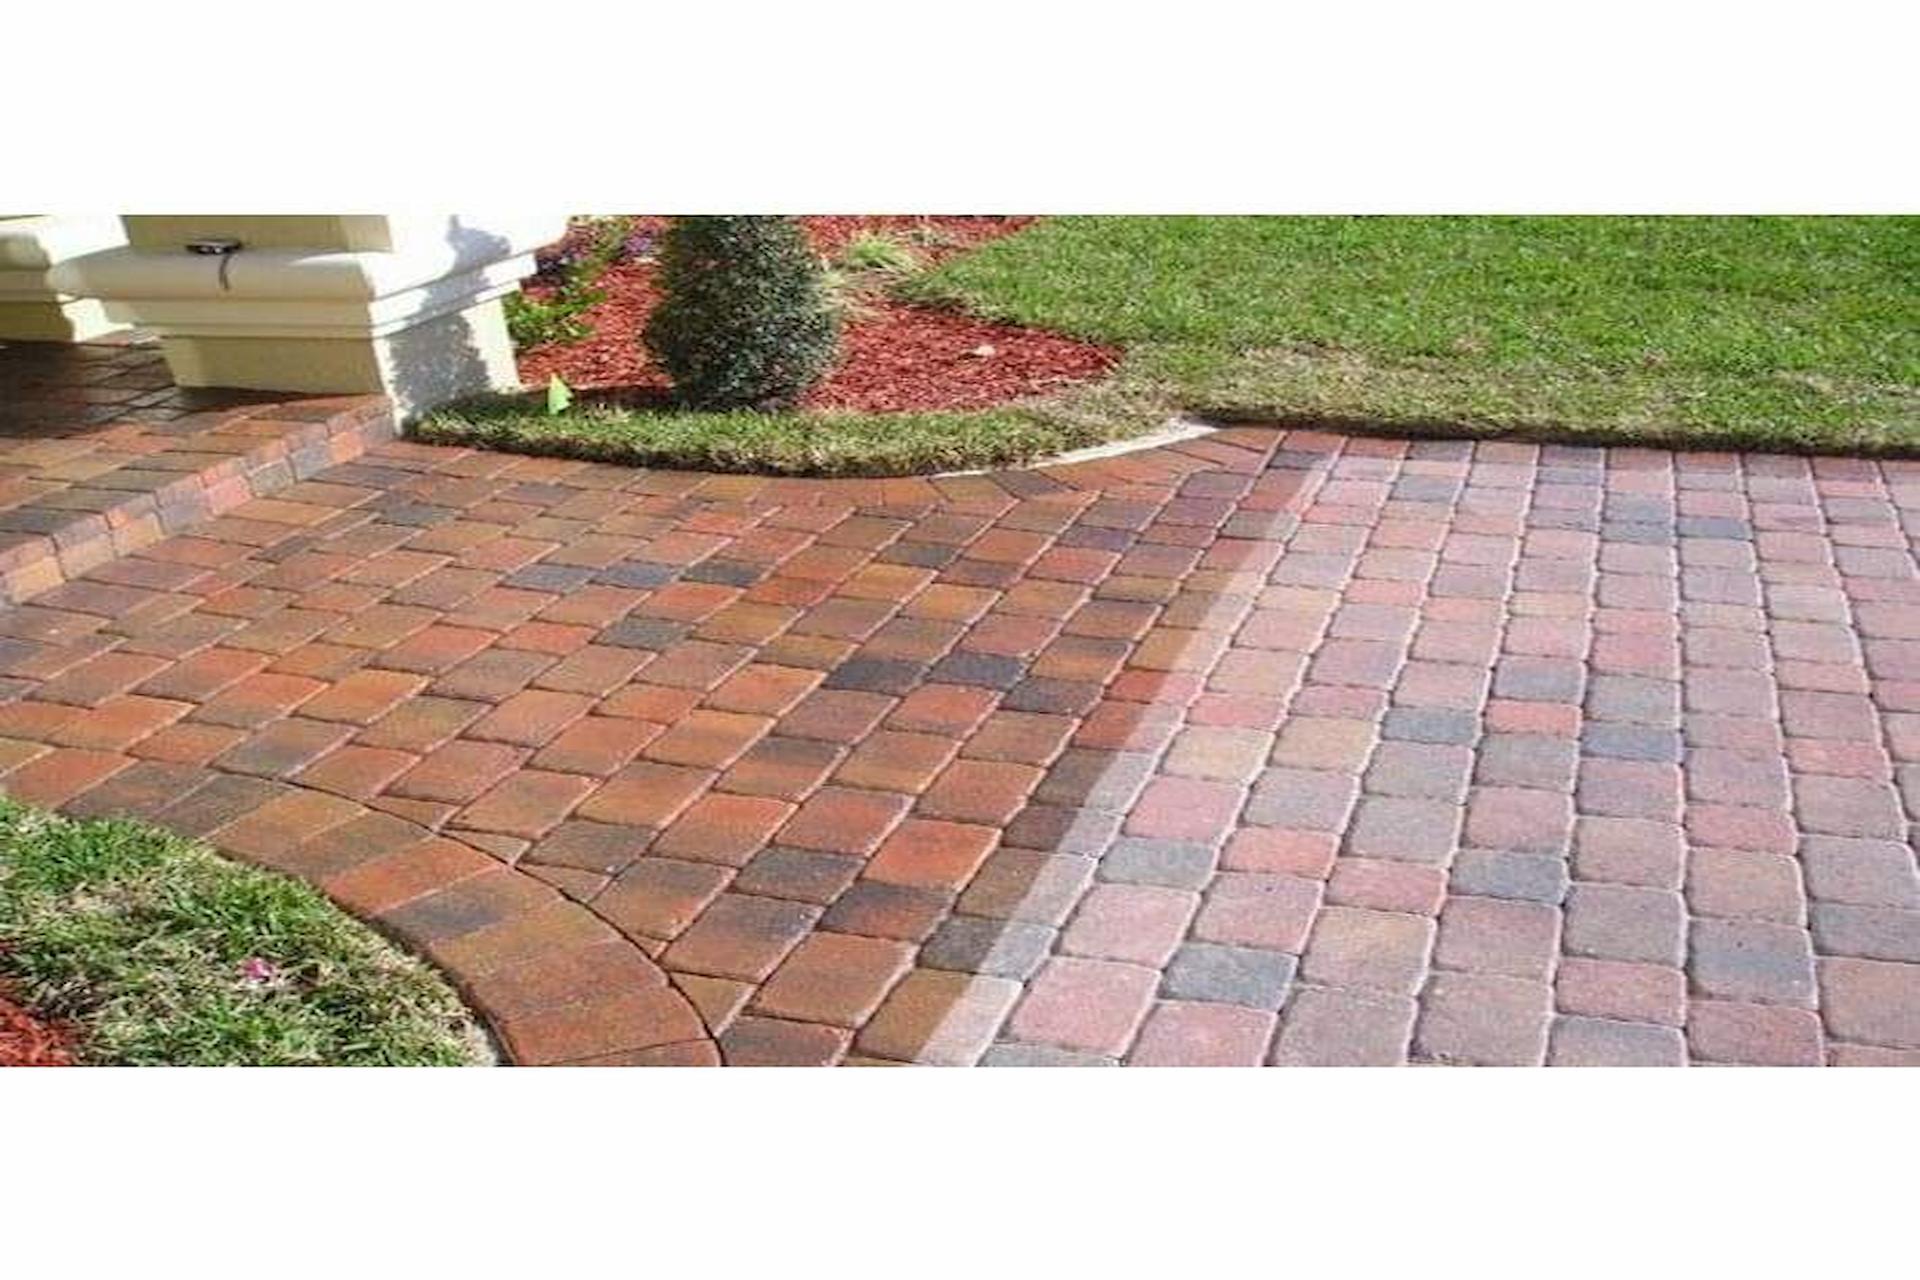 Why Should You Prefer To Use Sealants On Your Block Paving?